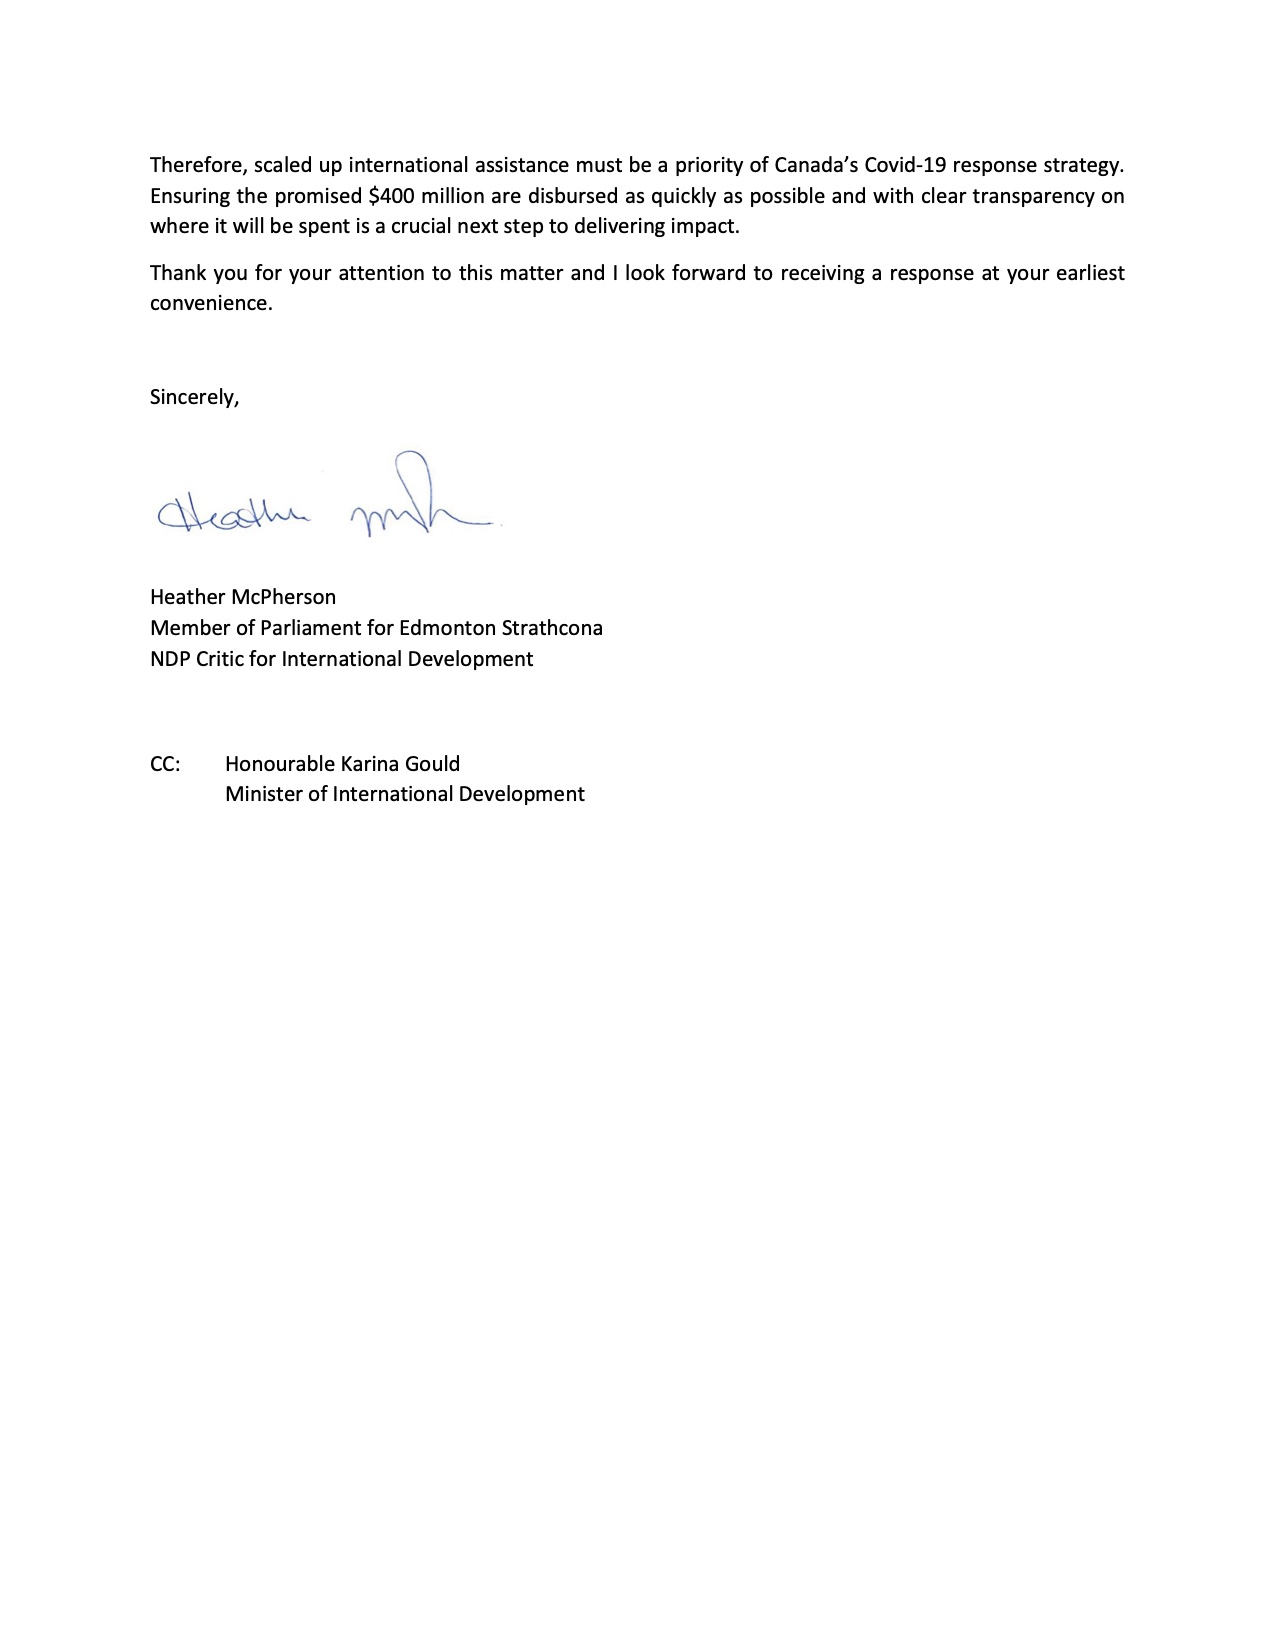 Letter to Minister Freeland, page 2